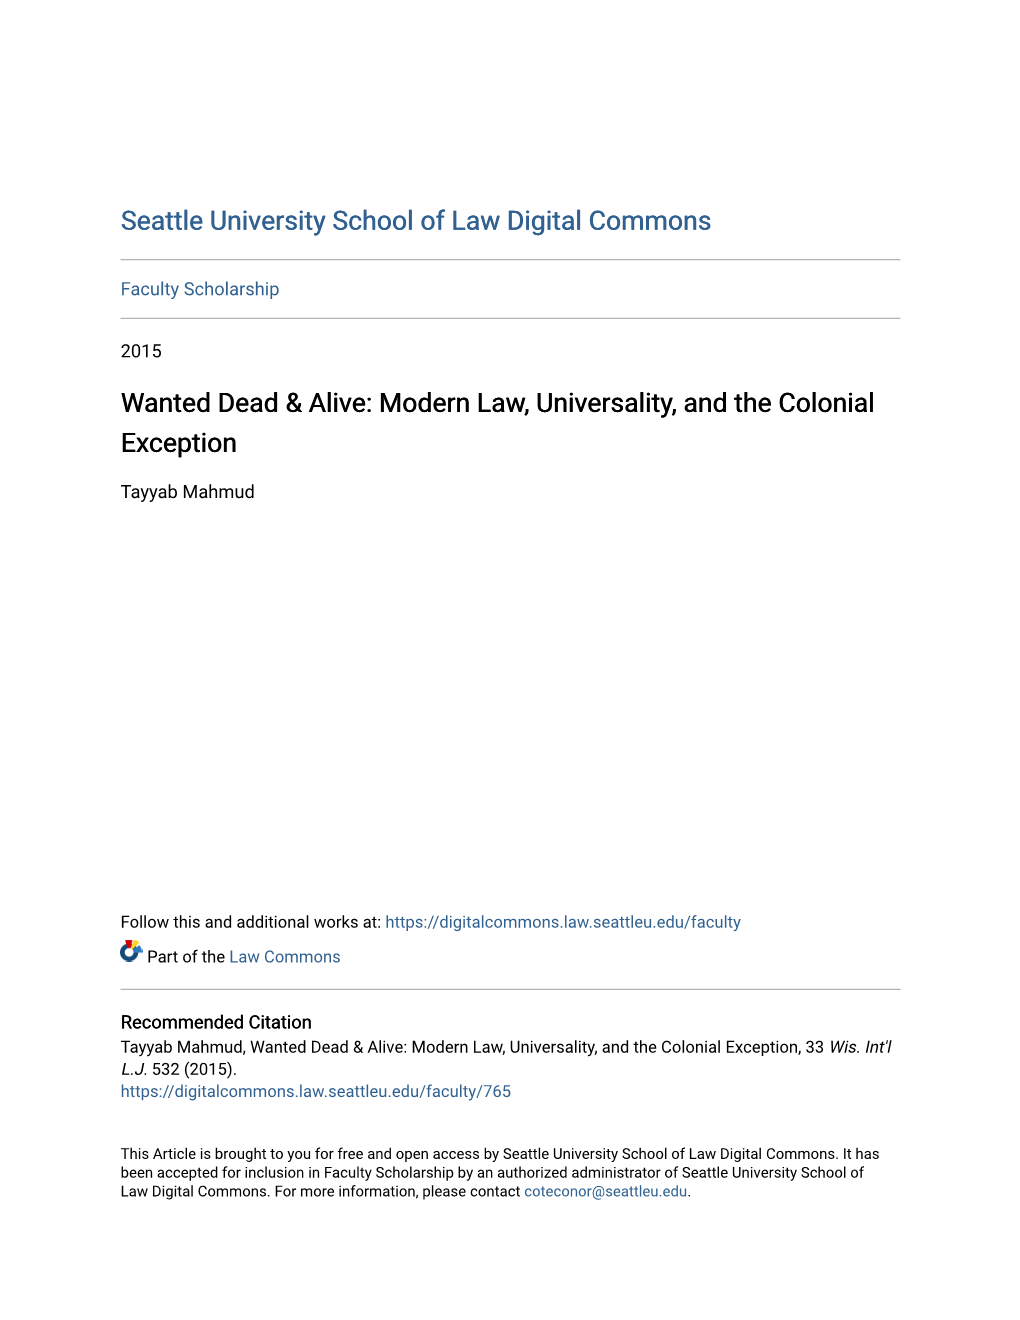 Wanted Dead & Alive: Modern Law, Universality, and the Colonial